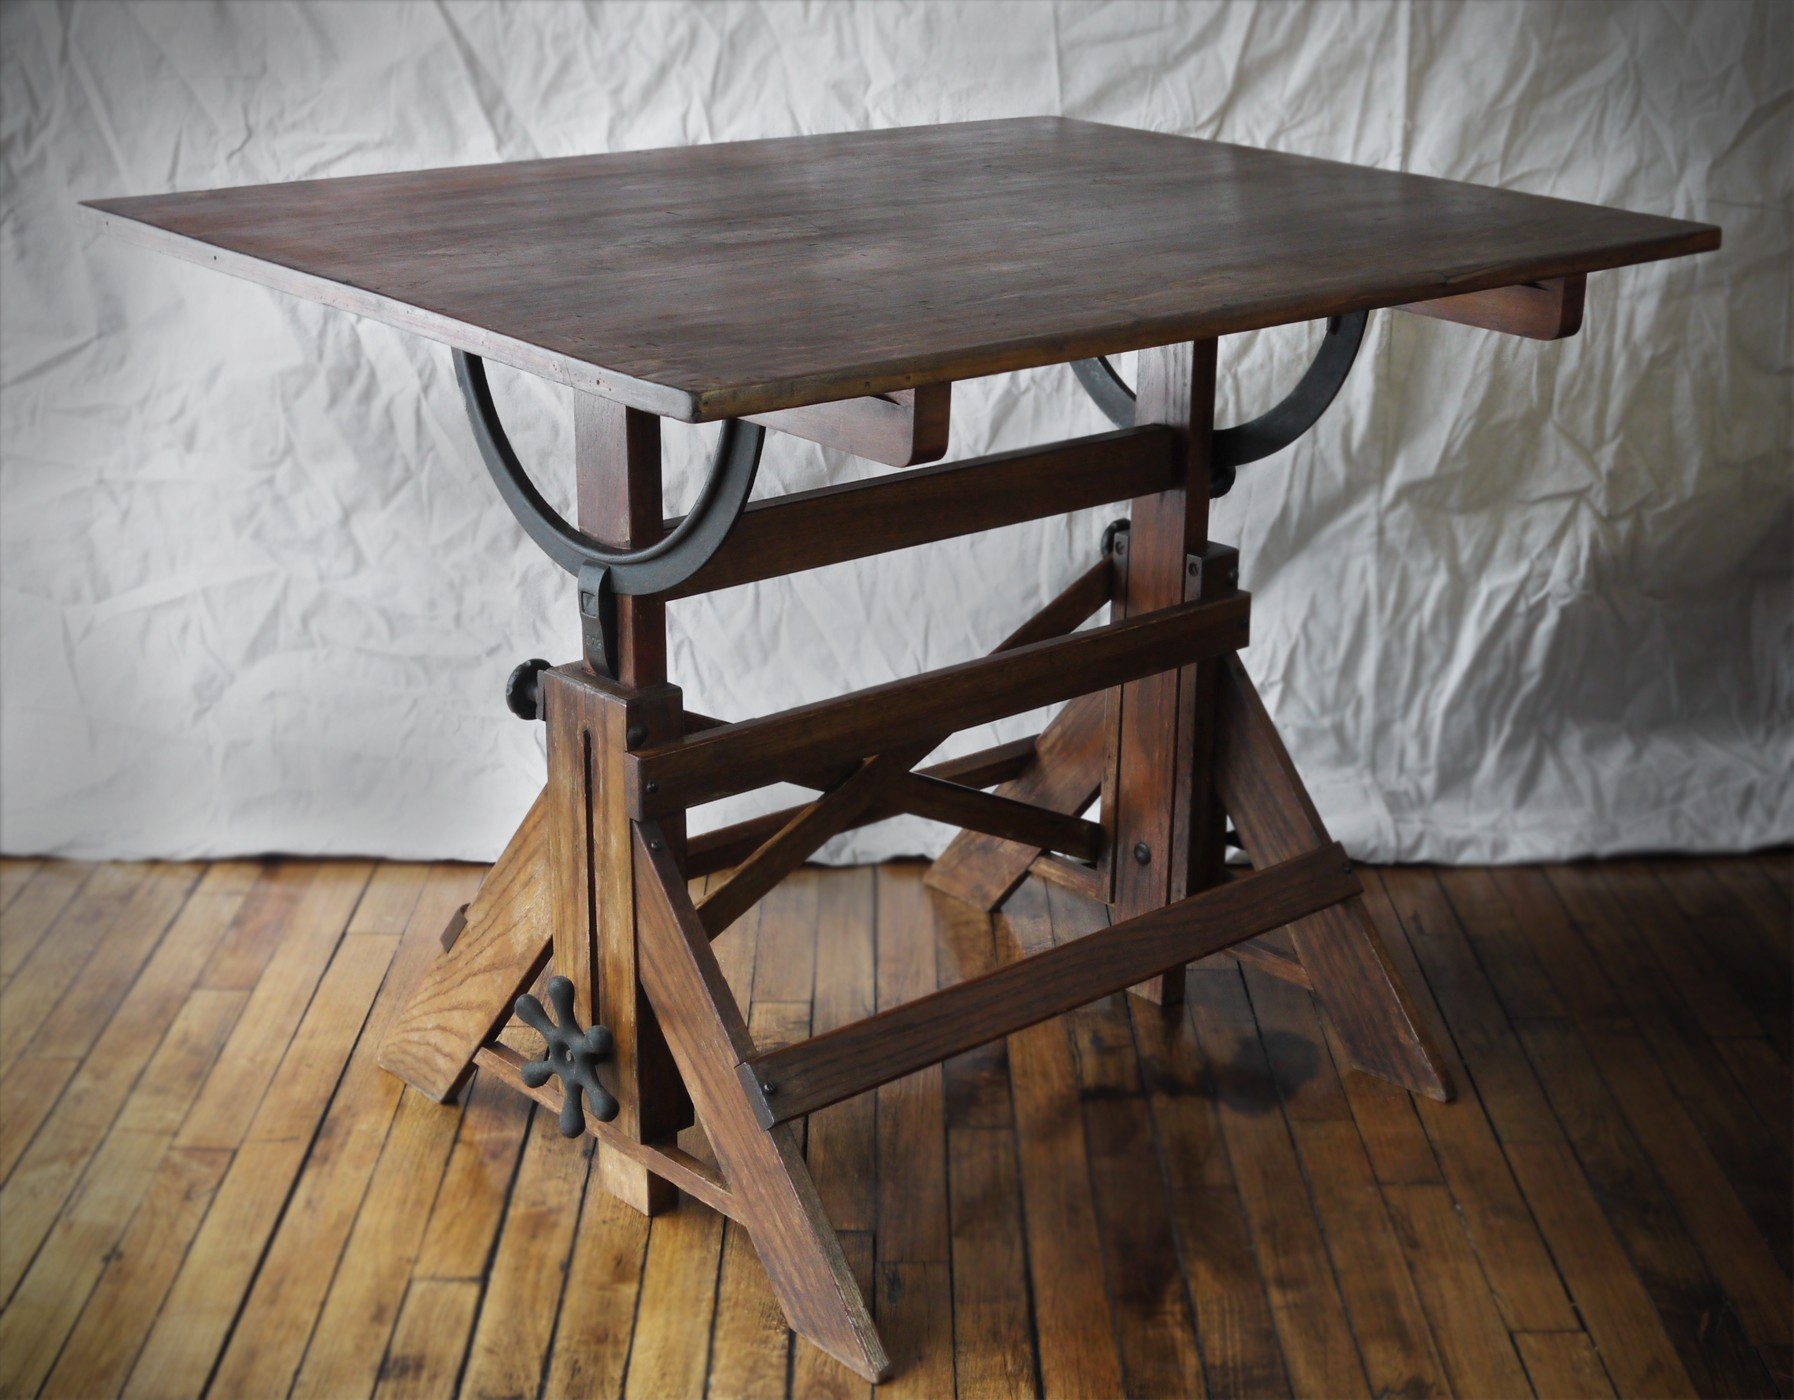 French Industrial Architect Drafting Table - Walnut